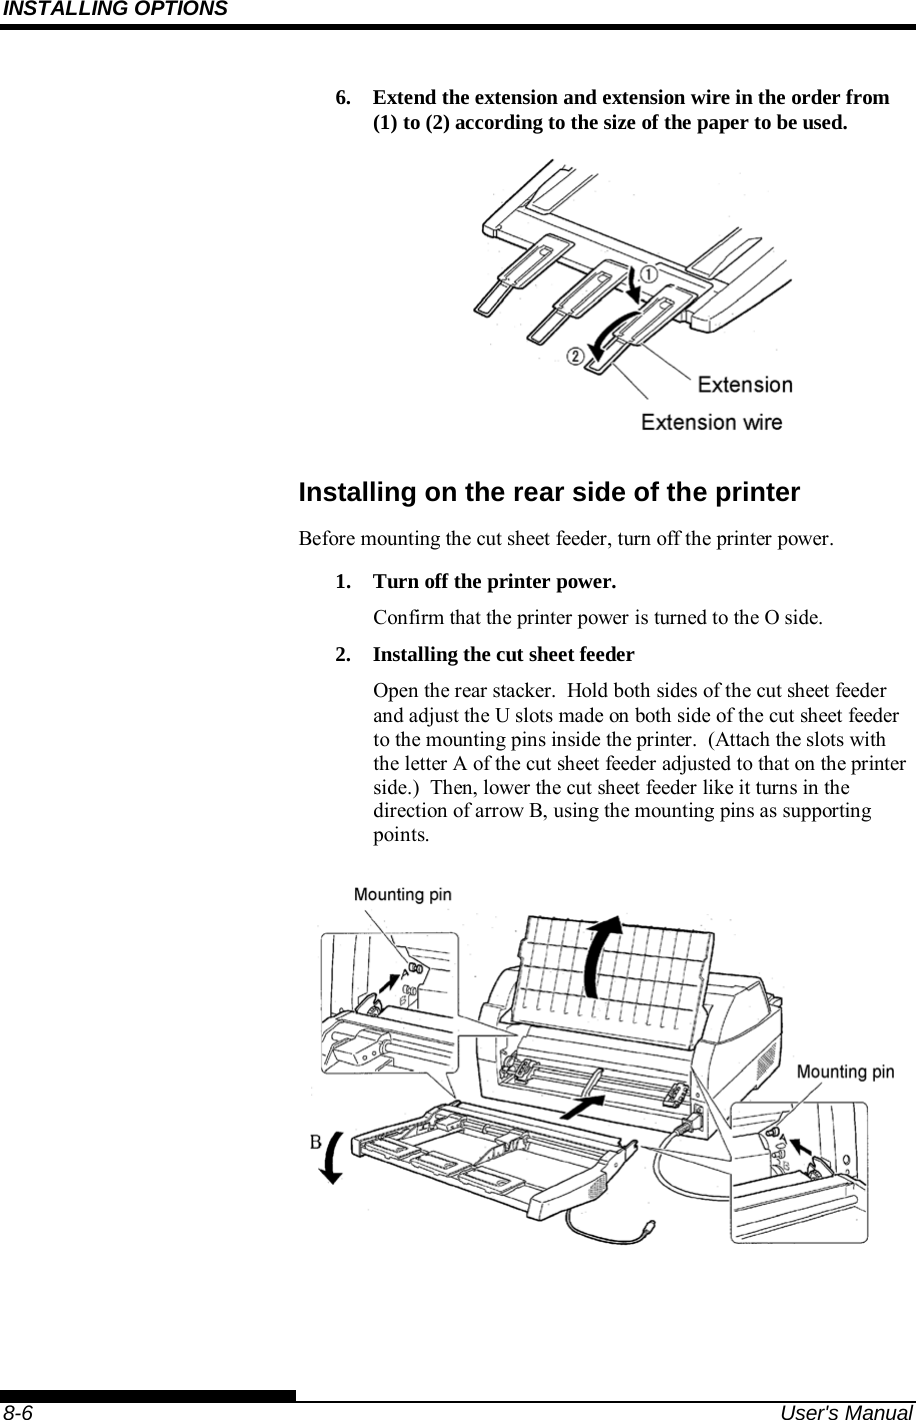 INSTALLING OPTIONS    8-6  User&apos;s Manual 6.  Extend the extension and extension wire in the order from (1) to (2) according to the size of the paper to be used.  Installing on the rear side of the printer Before mounting the cut sheet feeder, turn off the printer power. 1.  Turn off the printer power. Confirm that the printer power is turned to the O side. 2.  Installing the cut sheet feeder Open the rear stacker.  Hold both sides of the cut sheet feeder and adjust the U slots made on both side of the cut sheet feeder to the mounting pins inside the printer.  (Attach the slots with the letter A of the cut sheet feeder adjusted to that on the printer side.)  Then, lower the cut sheet feeder like it turns in the direction of arrow B, using the mounting pins as supporting points.  